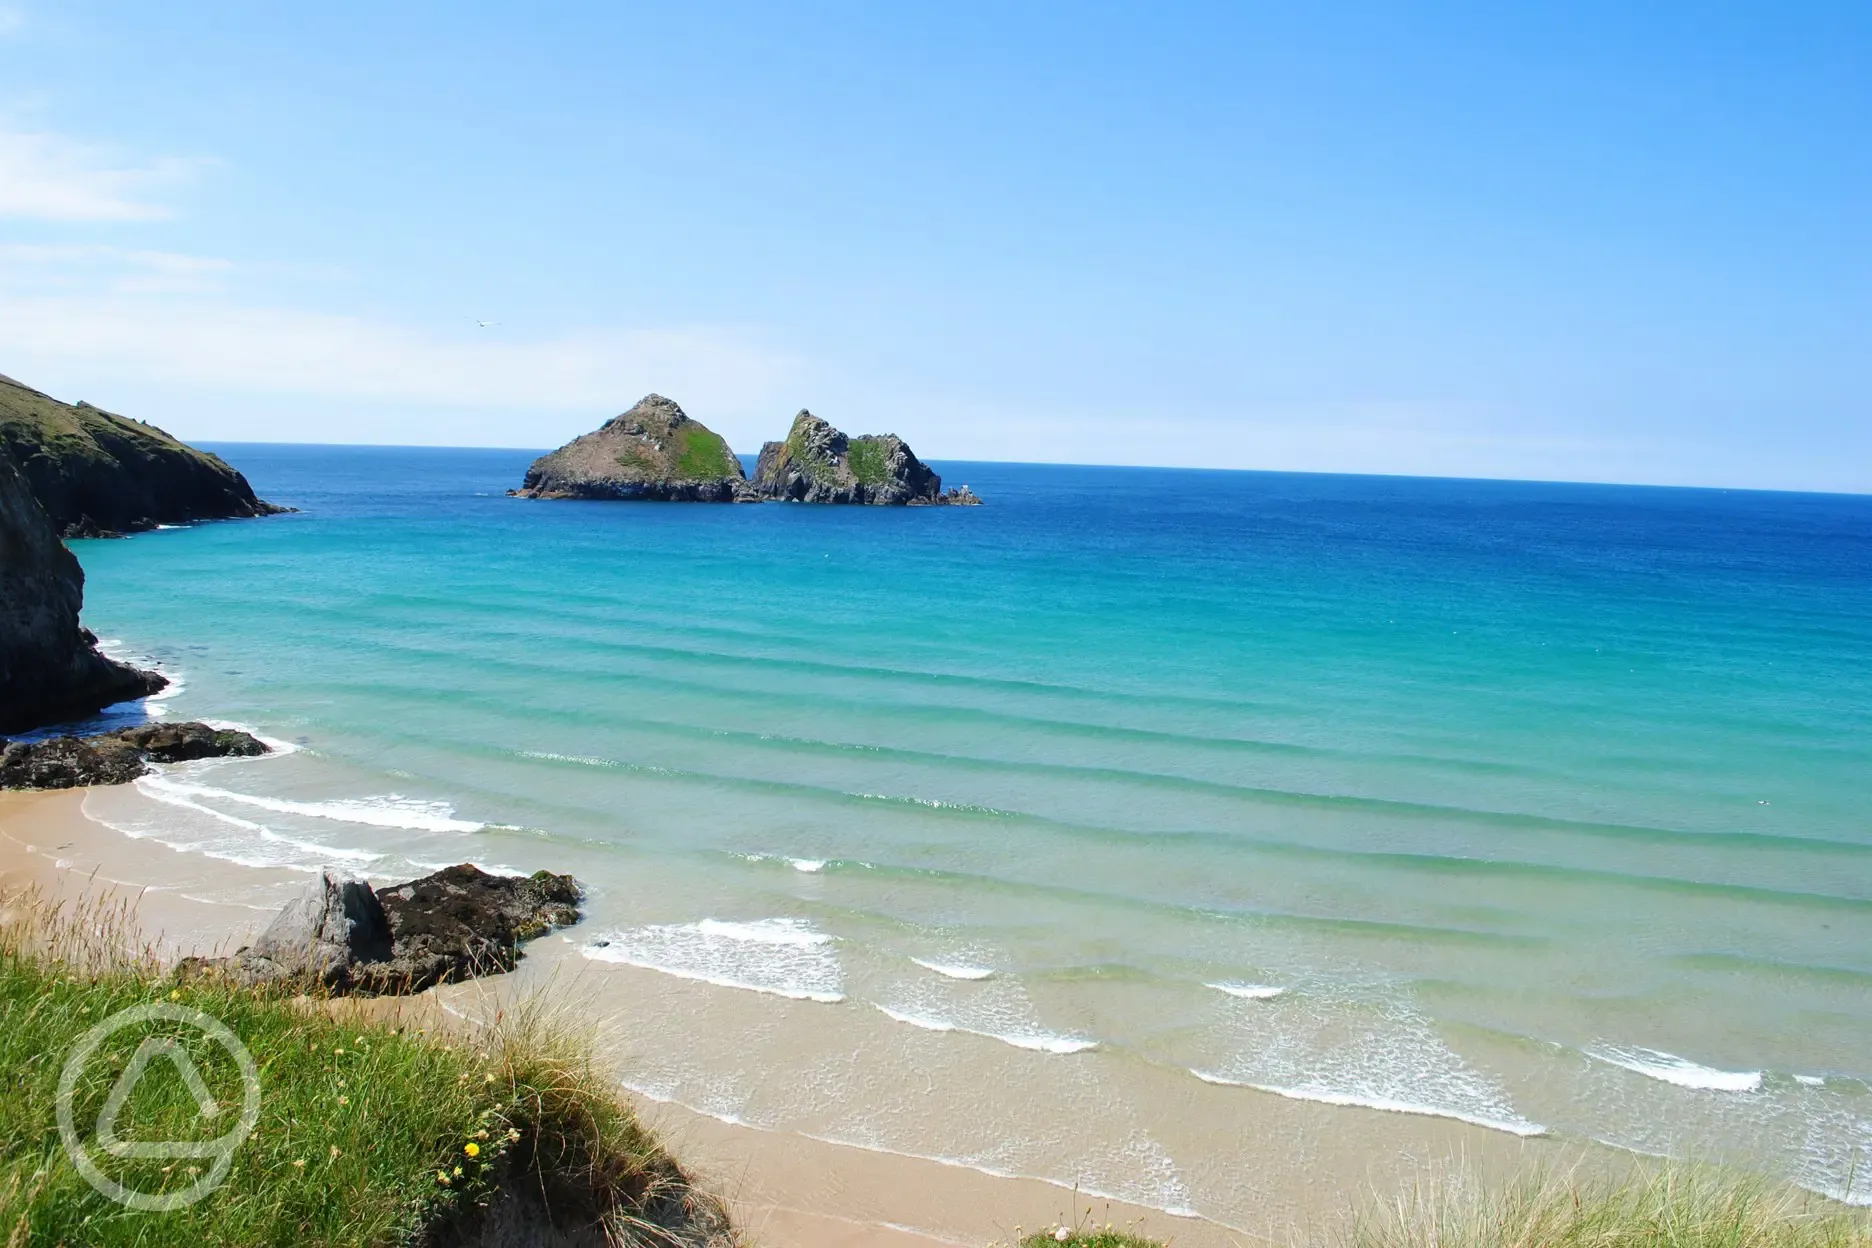 Holywell Bay Beach is a 15 minute walk from the site